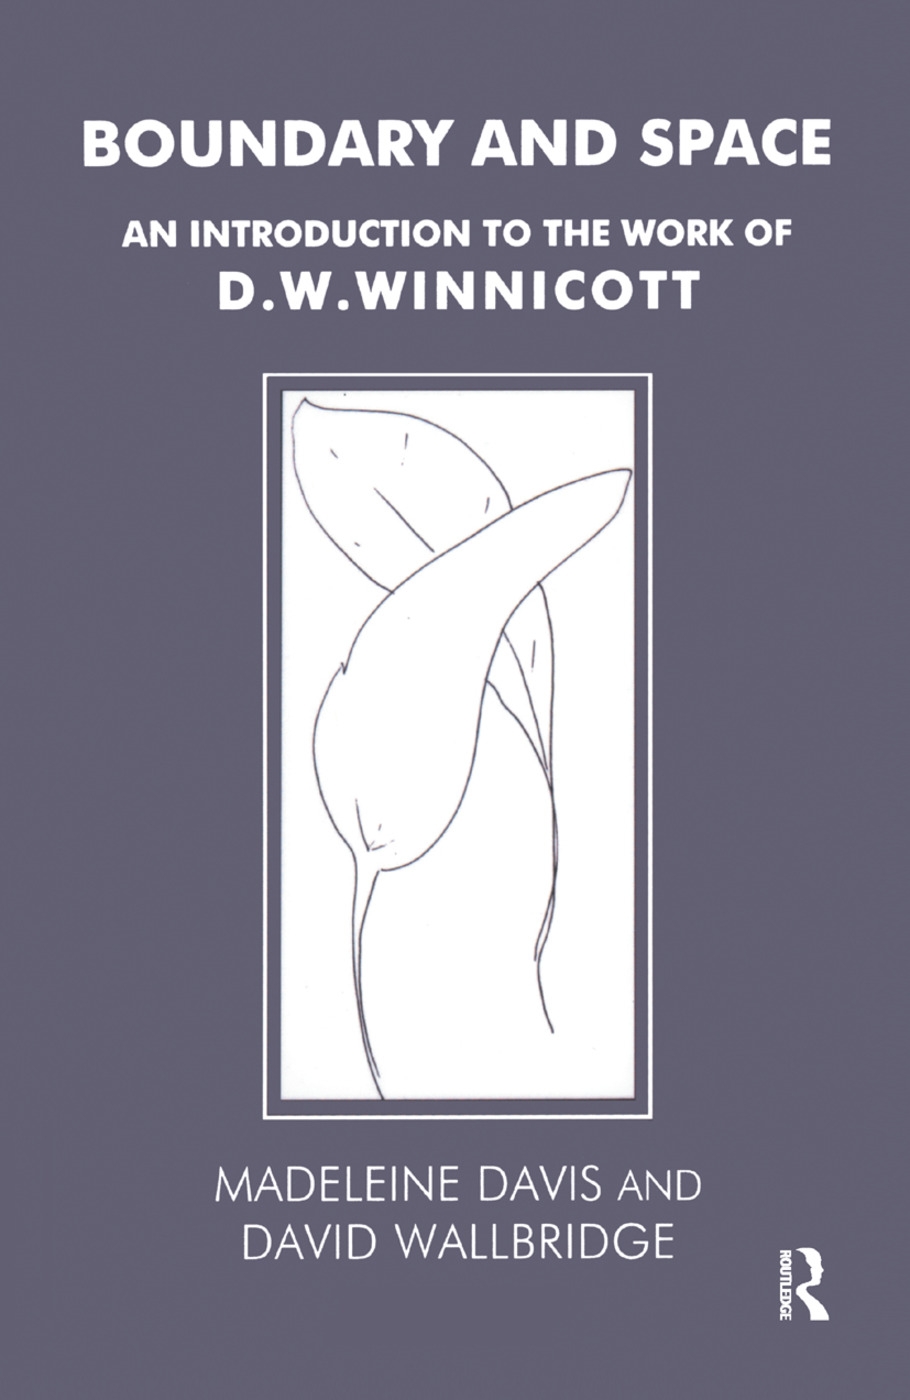 Boundary and Space: An Introduction to the Work of D. W. Winnicott